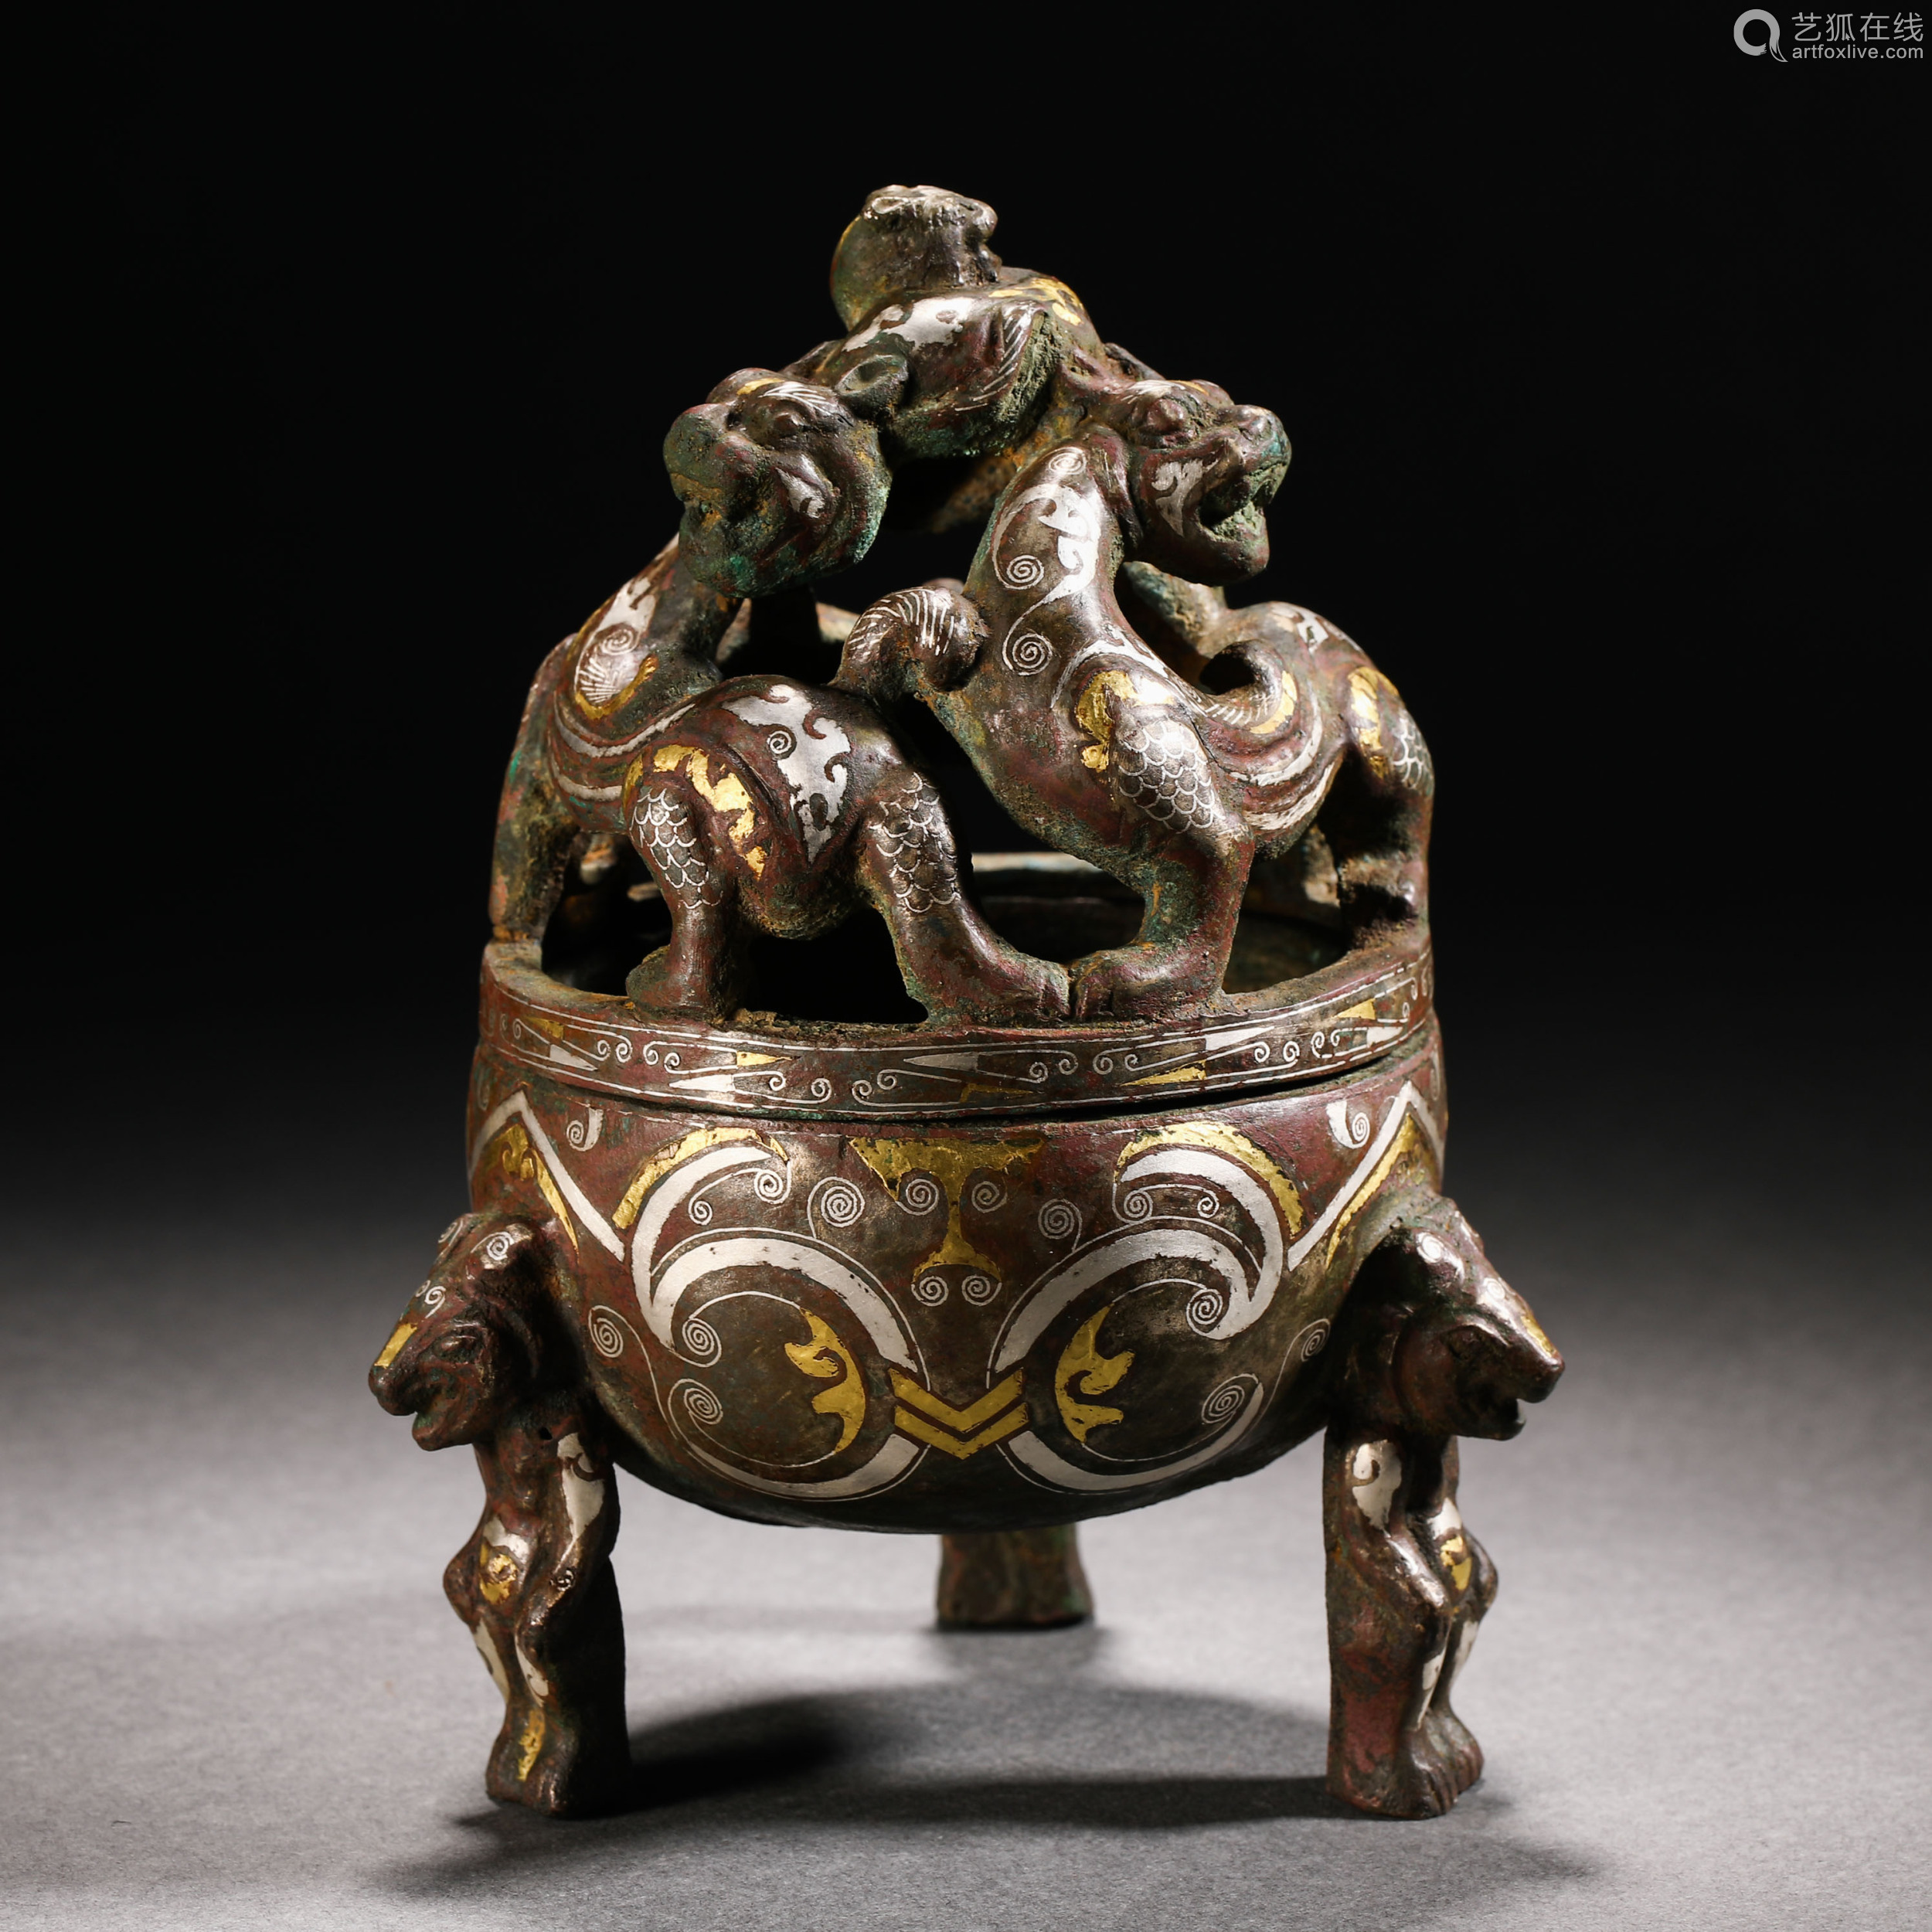 Han Dynasty Gold and Silver Aromatherapy Oven